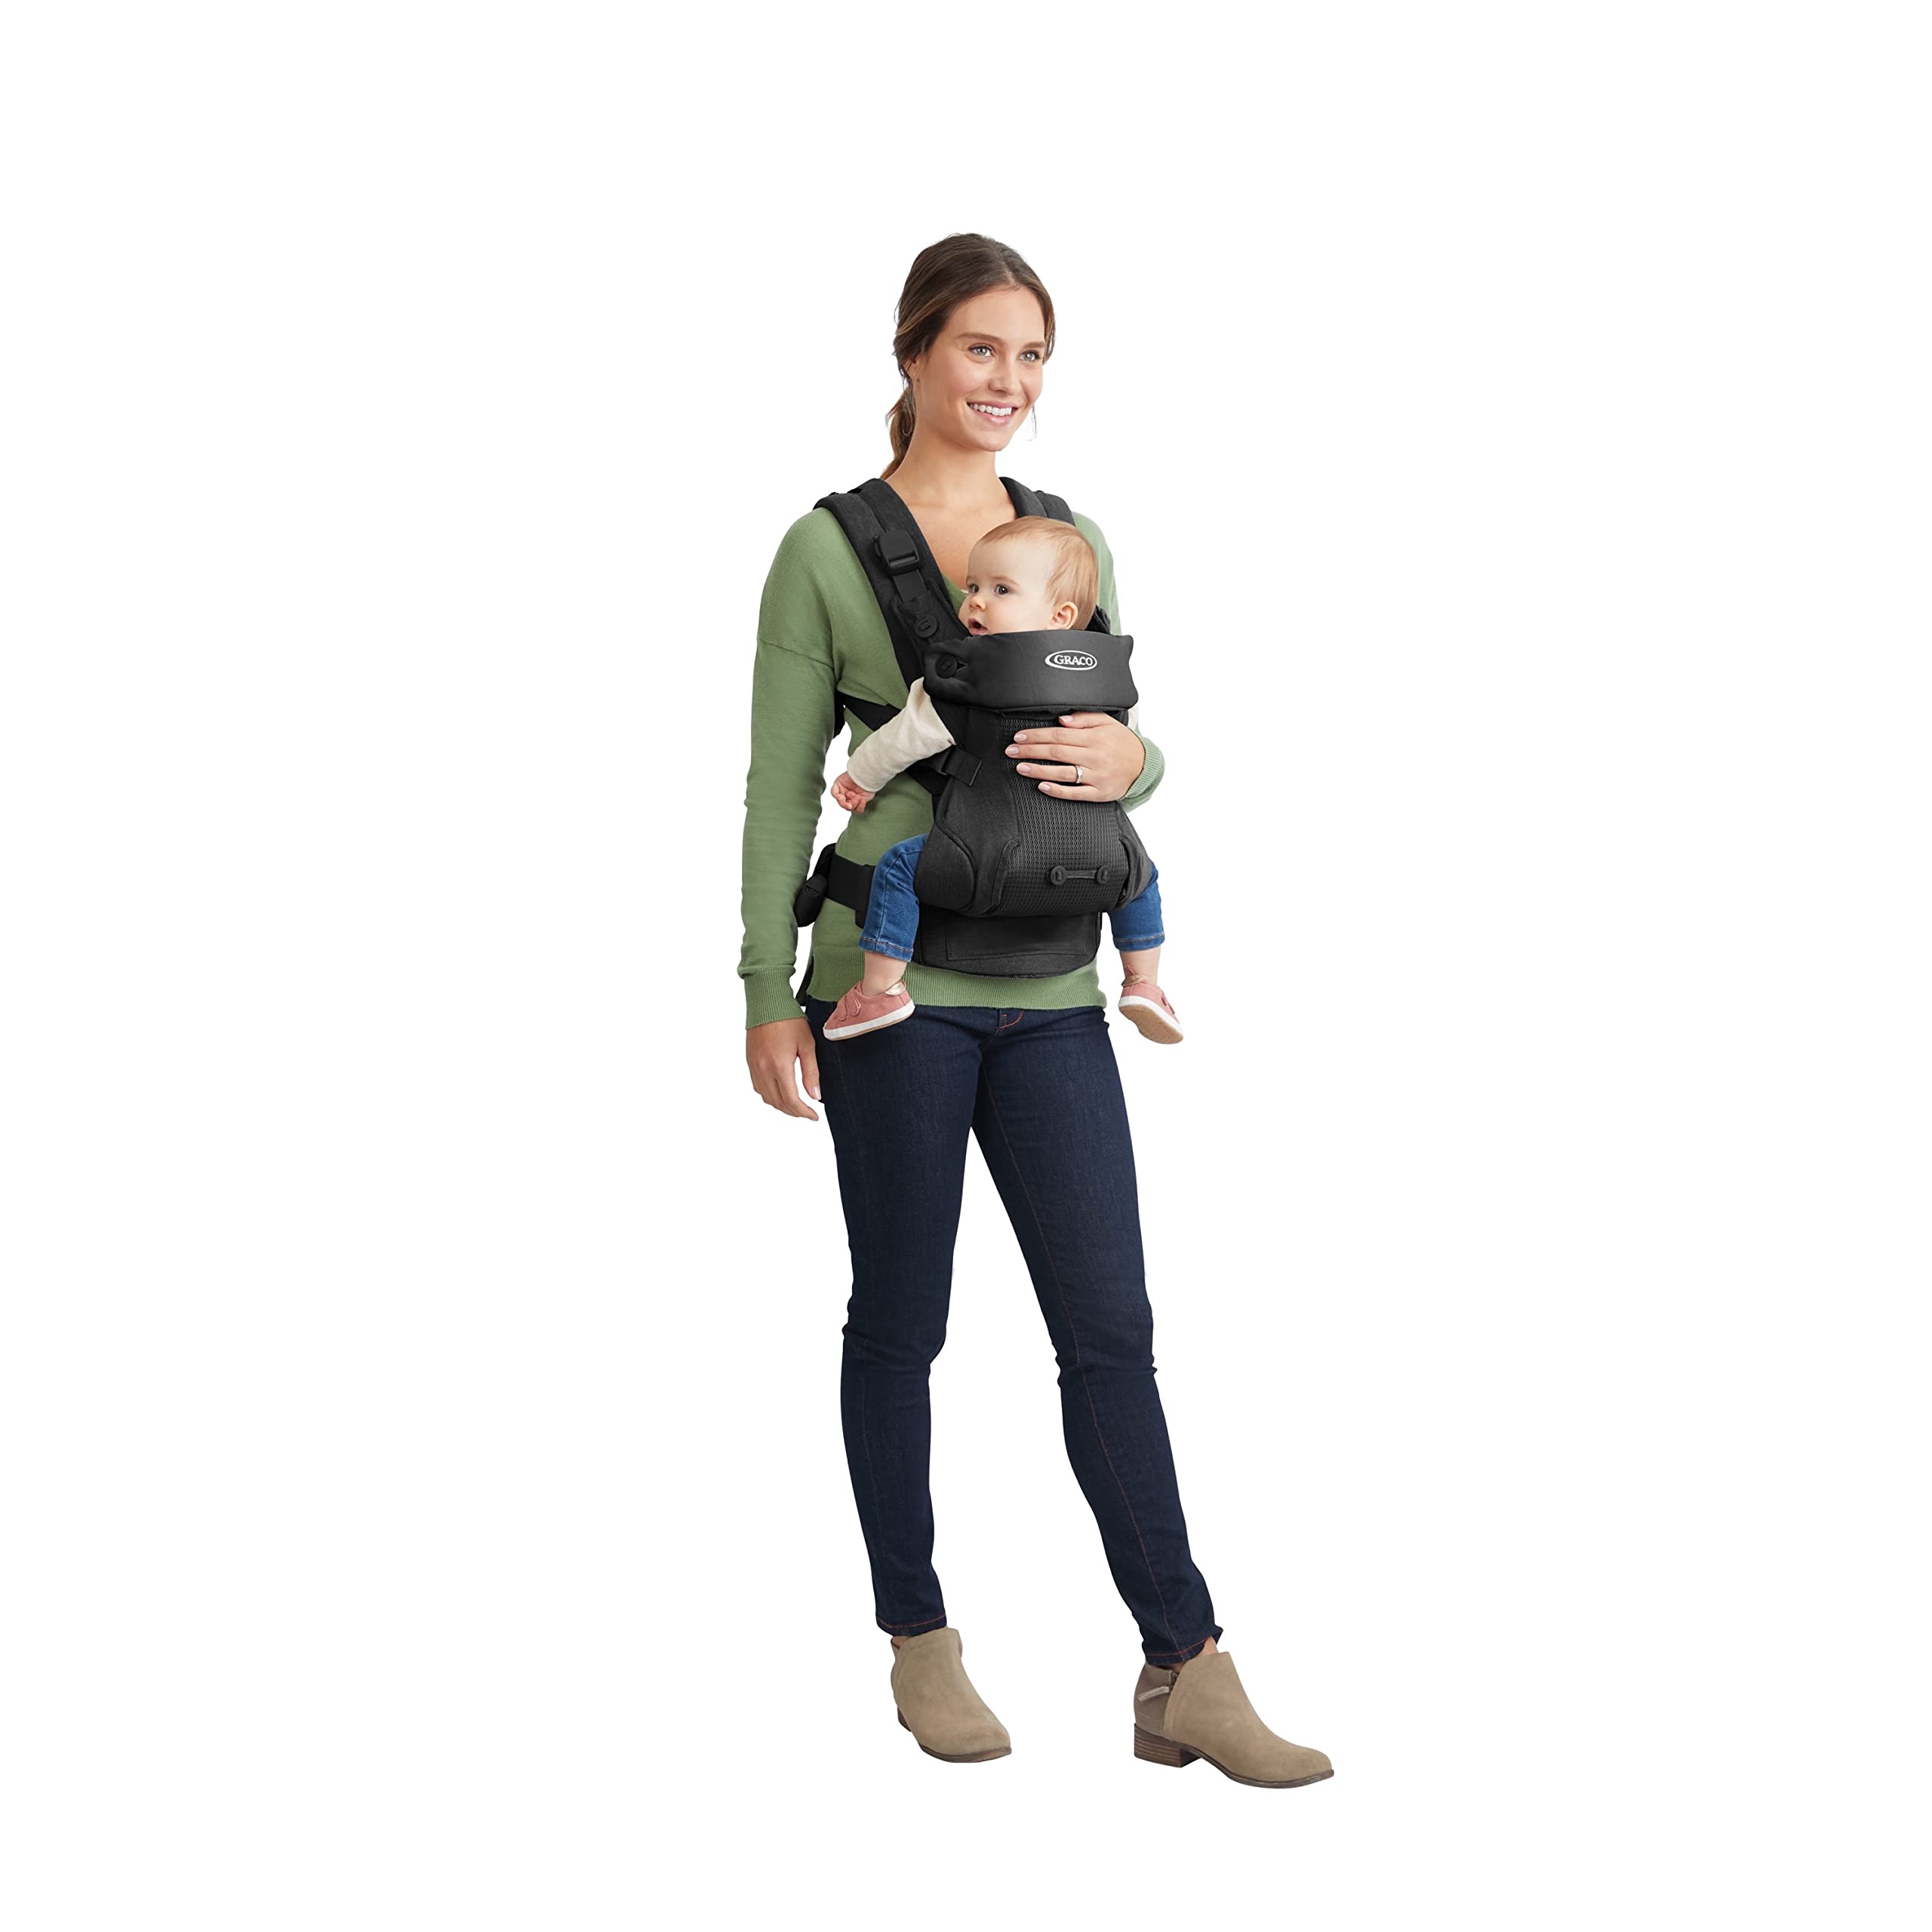 Graco Cradle Me 4 in 1 Baby Carrier | Includes Newborn Mode with No Insert Needed, Black Onyx